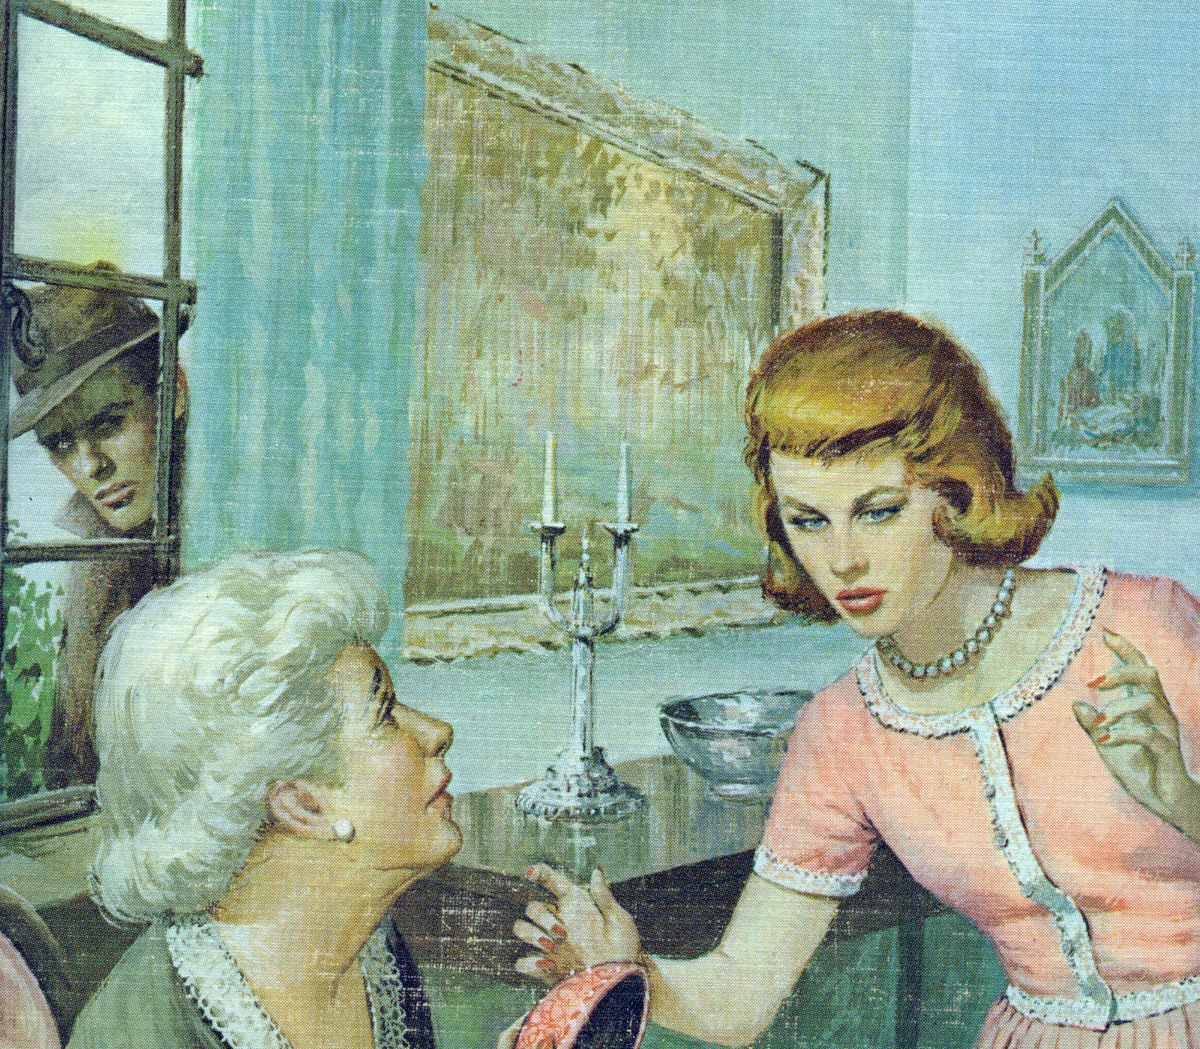 The Clue in the Jewel Box, courtesy of the Nancy Drew Research Institute